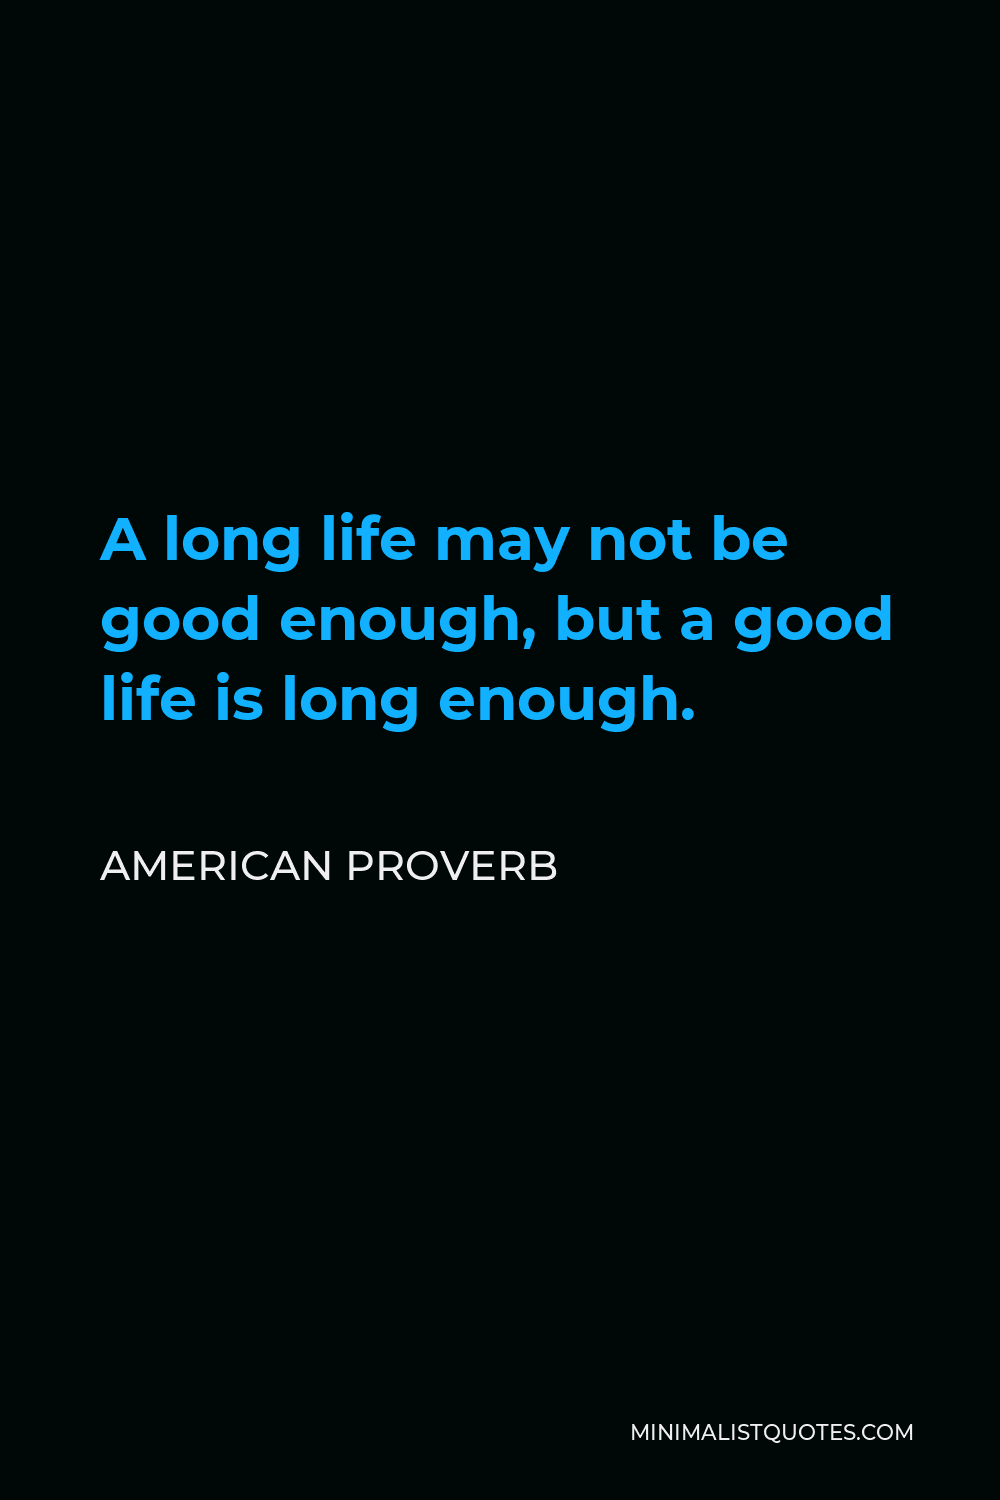 American Proverb Quote - A long life may not be good enough, but a good life is long enough.